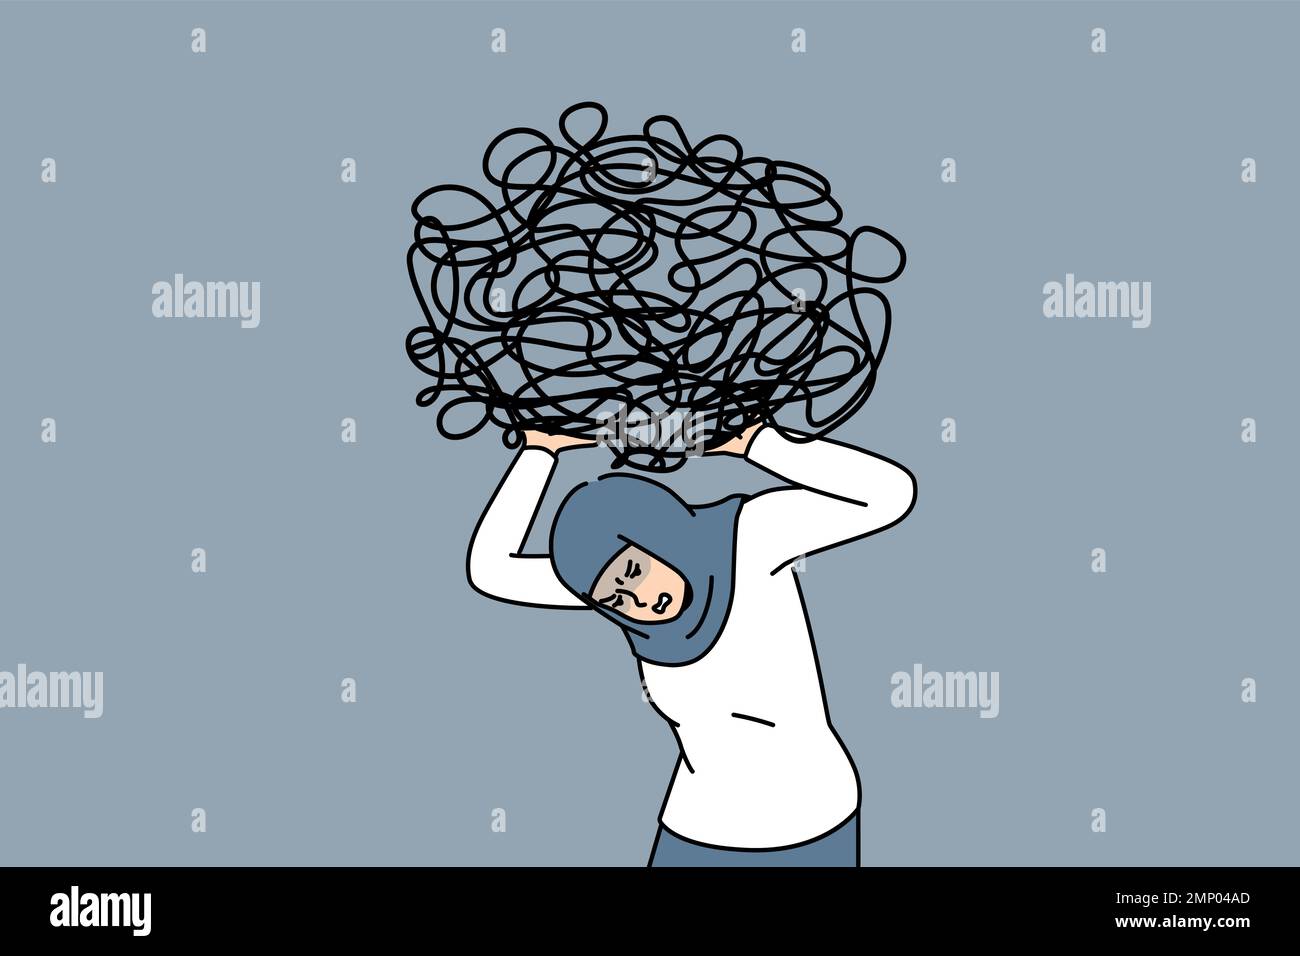 Unhappy Arabic businesswoman carrying on shoulder heavy messy load suffer from work difficulties and crisis. Distressed arab female employee with burden on back. Vector illustration.  Stock Vector